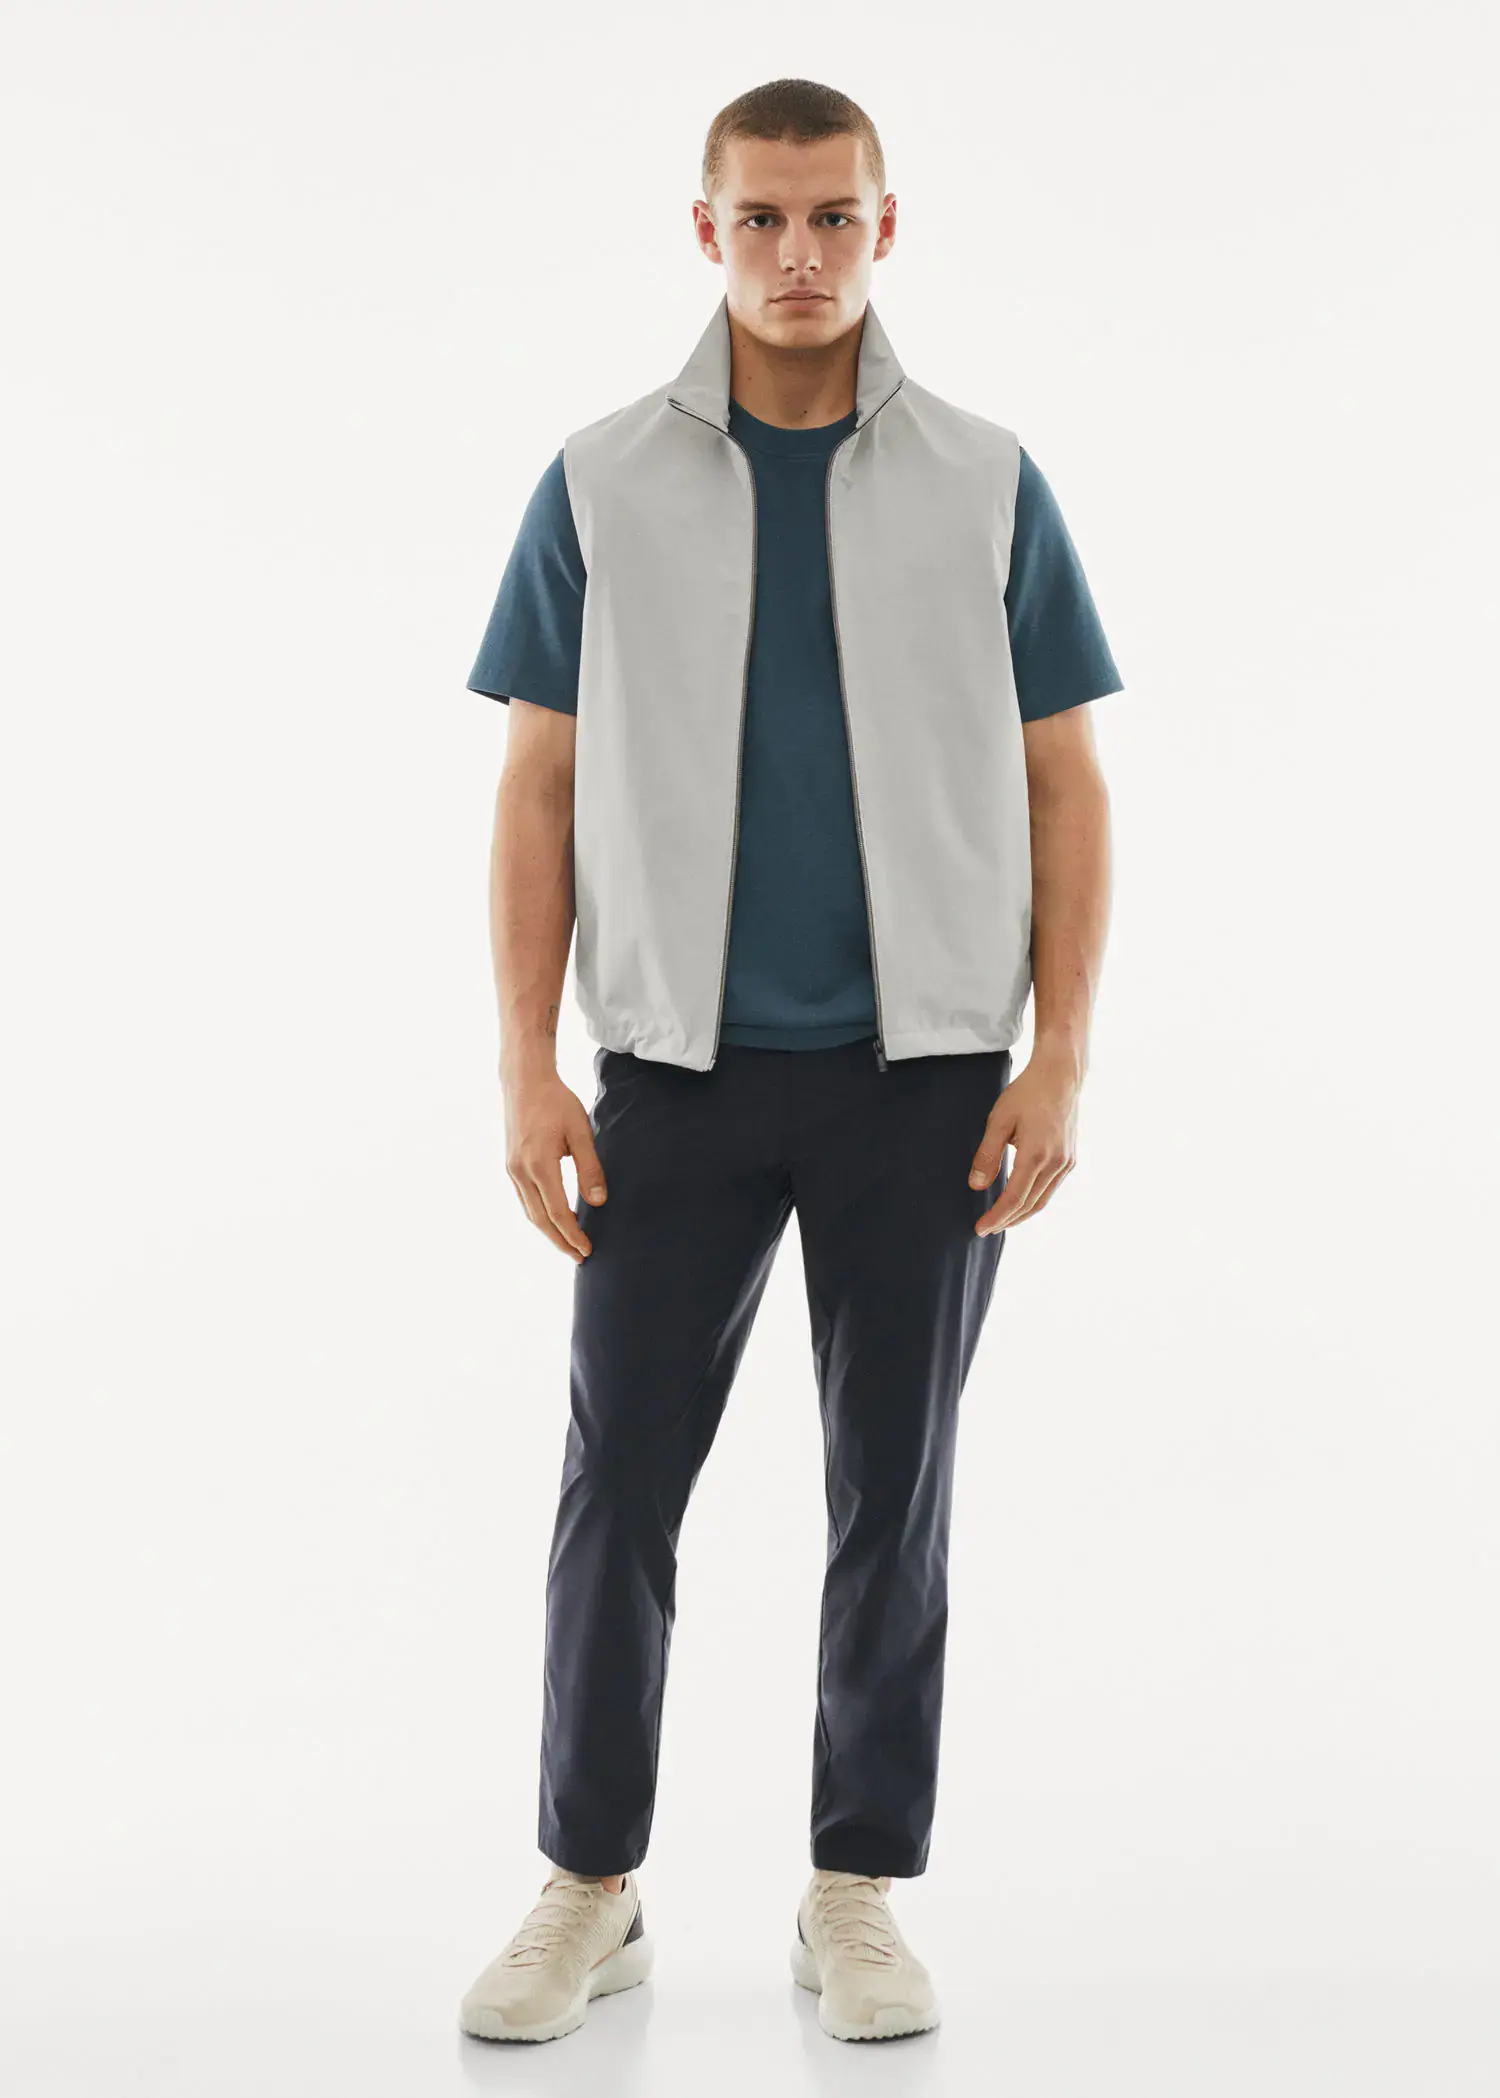 Mango Water-repellent technical vest. a man wearing a white vest and a blue shirt. 